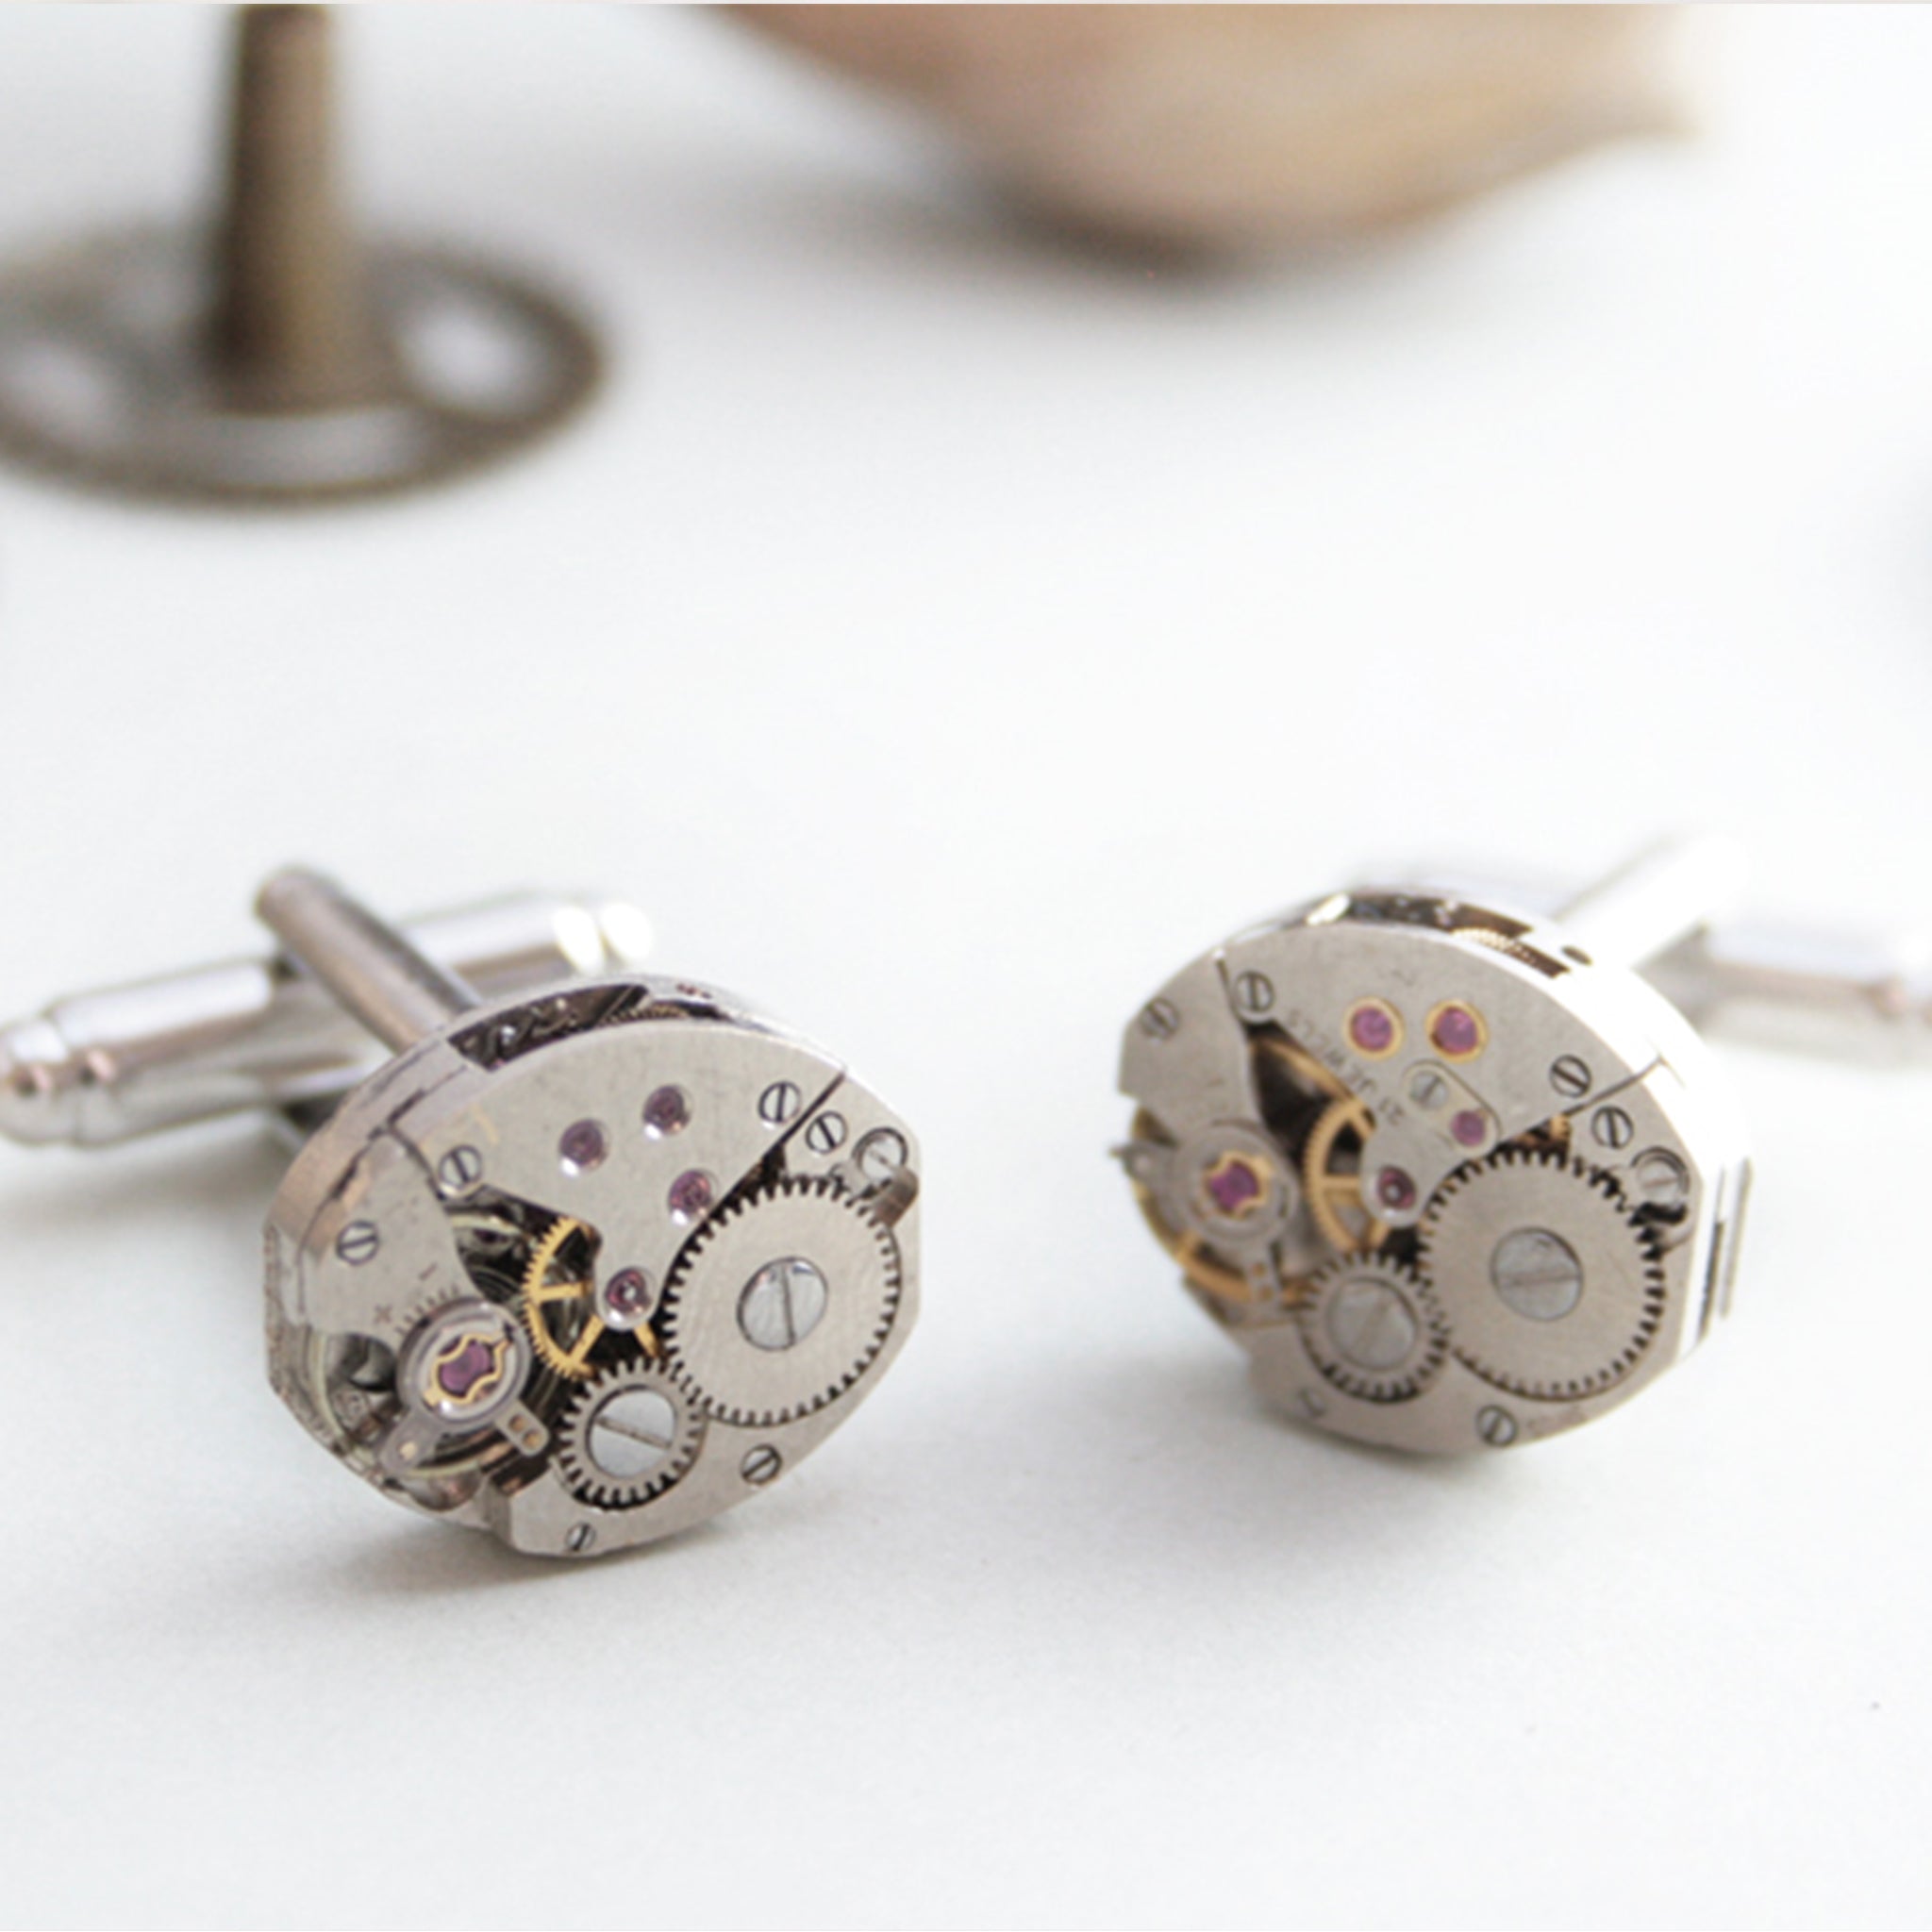 Cufflinks featuring old clock parts